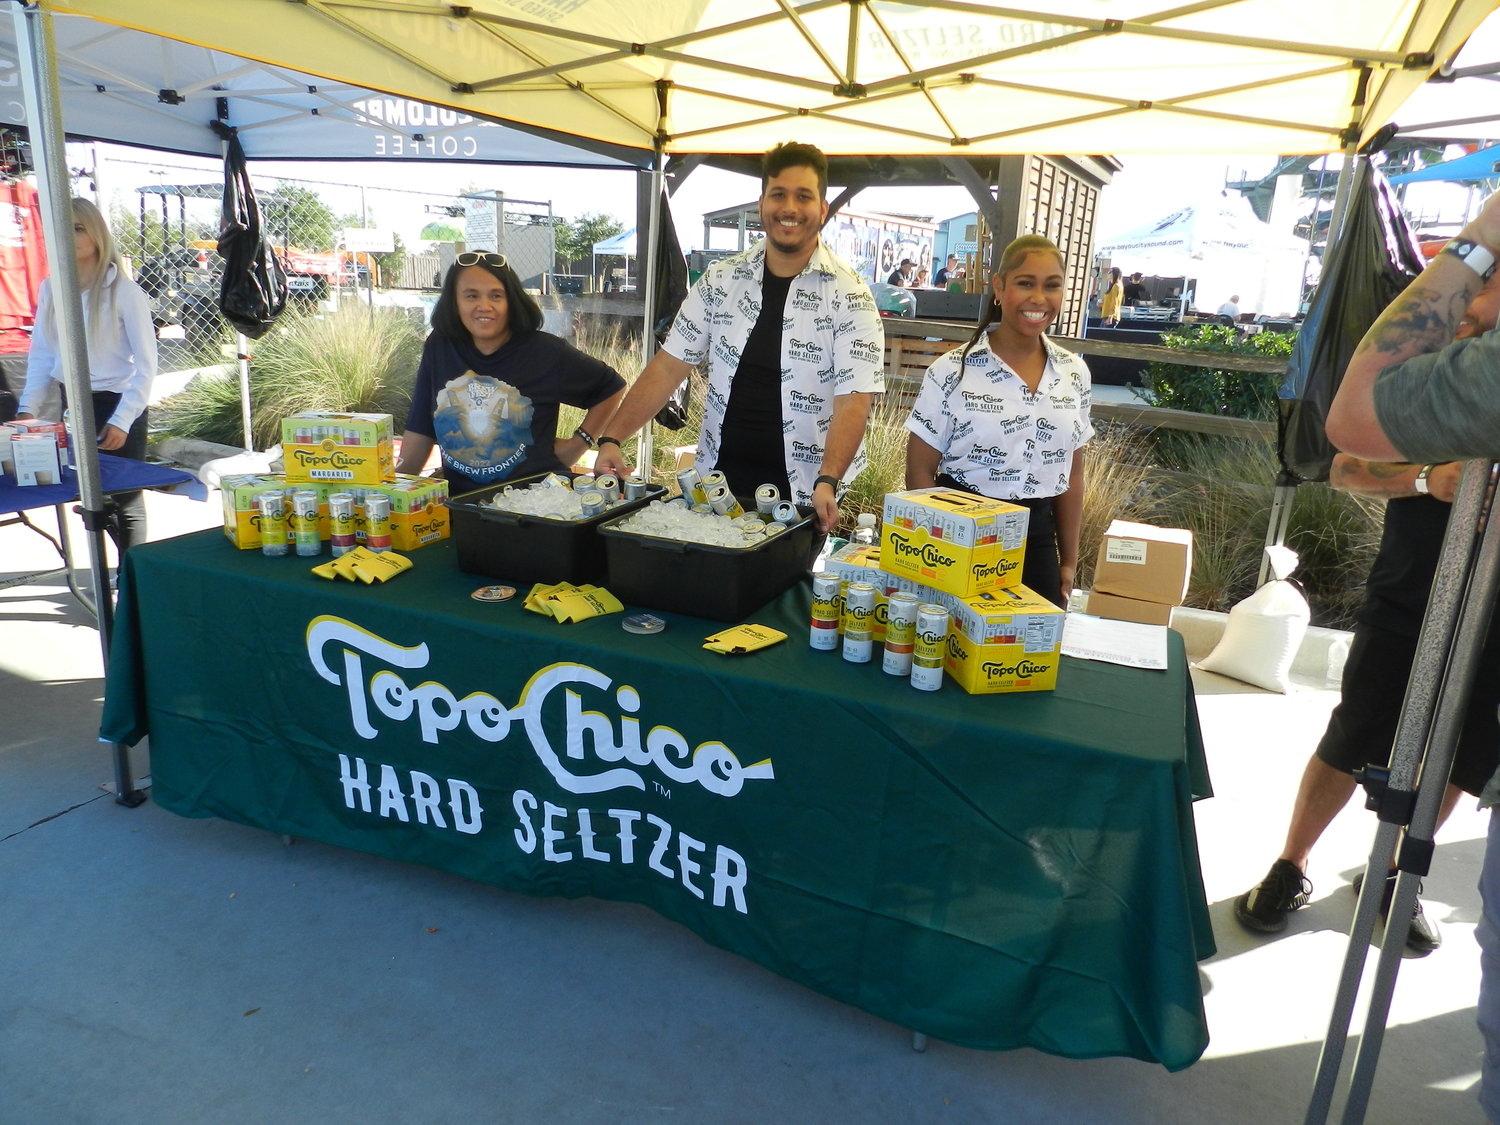 Topo Chico hard seltzer has been among the drinks for Wild West Brewfest attendees to enjoy. The next Brewfest is set for March 23-25 at Typhoon Texas.